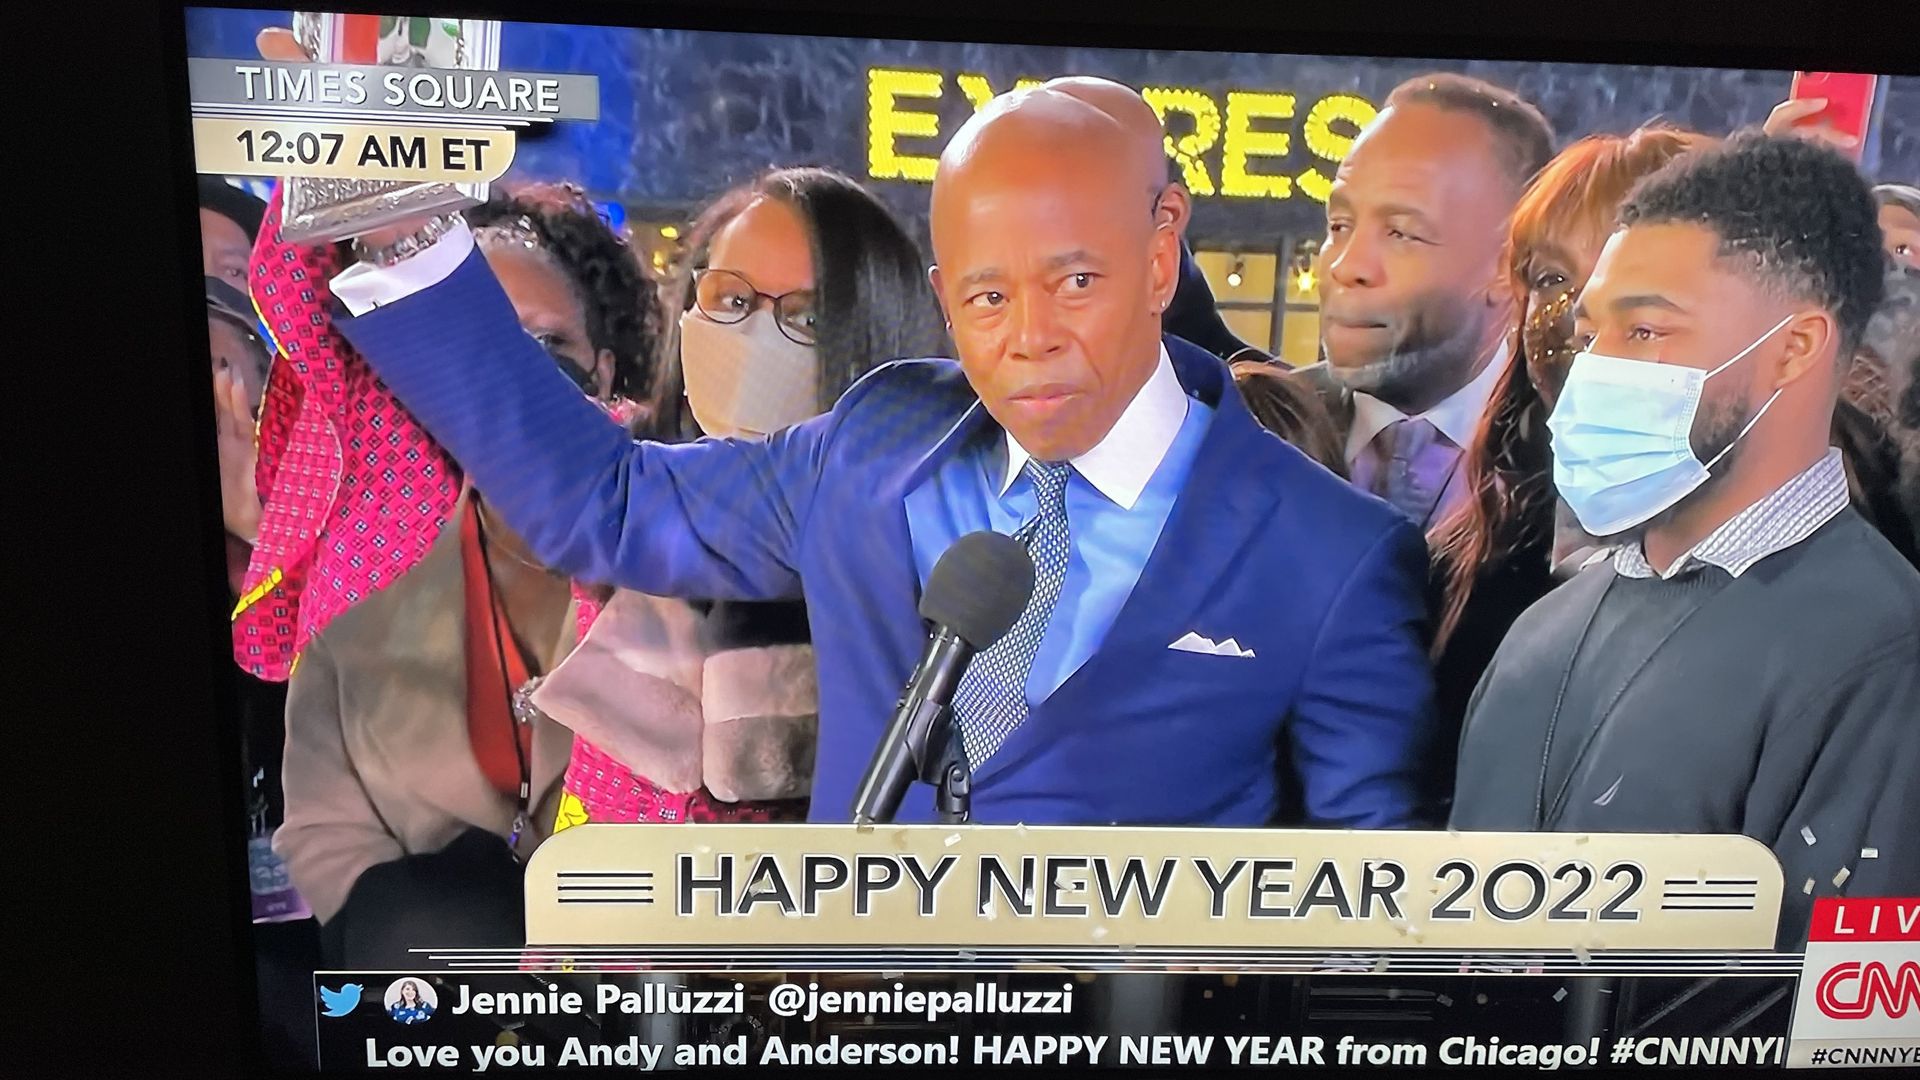 NYC Mayor Eric Adams is sworn in just after midnight on New Year's, as seen on CNN